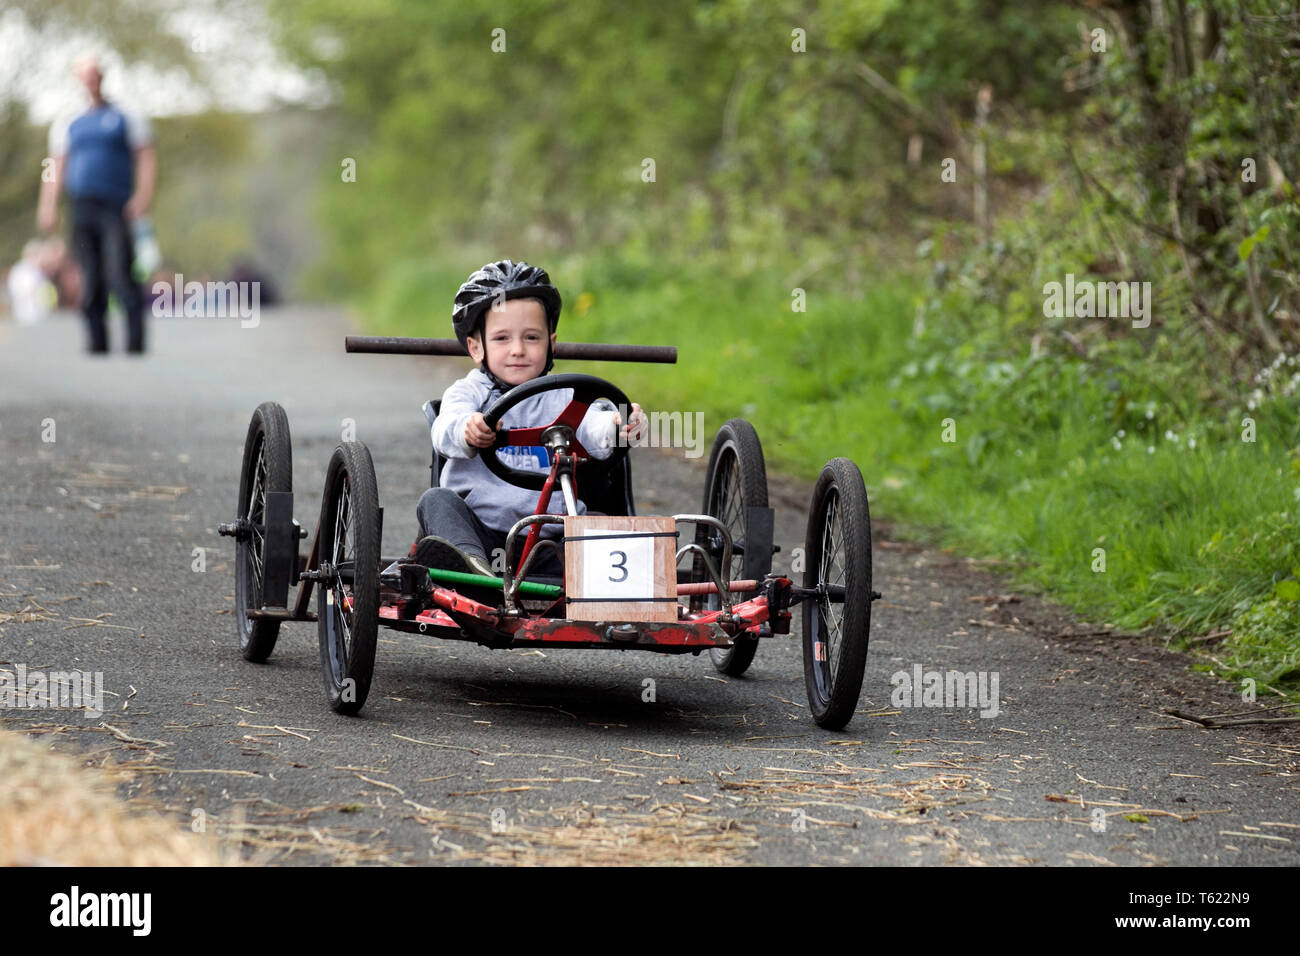 Soapbox derby in Wray, Lancashire, UK. 28th April, 2019. Wacky Wrayces; Robert Woodhouse, 10 years old at the Scarecrow Festival competing in the junior soap box derby races. The 2019 theme, chosen by the local school, is to highlight the themes of “Evolution: Extinct, Endangered, Existing” This fun festive community event the annual Wray Scarecrow Festival in Lancashire is now in its 26th year and draws thousands of visitors to the rural village for the April celebration. Credit: MediaWorldImages/AlamyLiveNews. Stock Photo